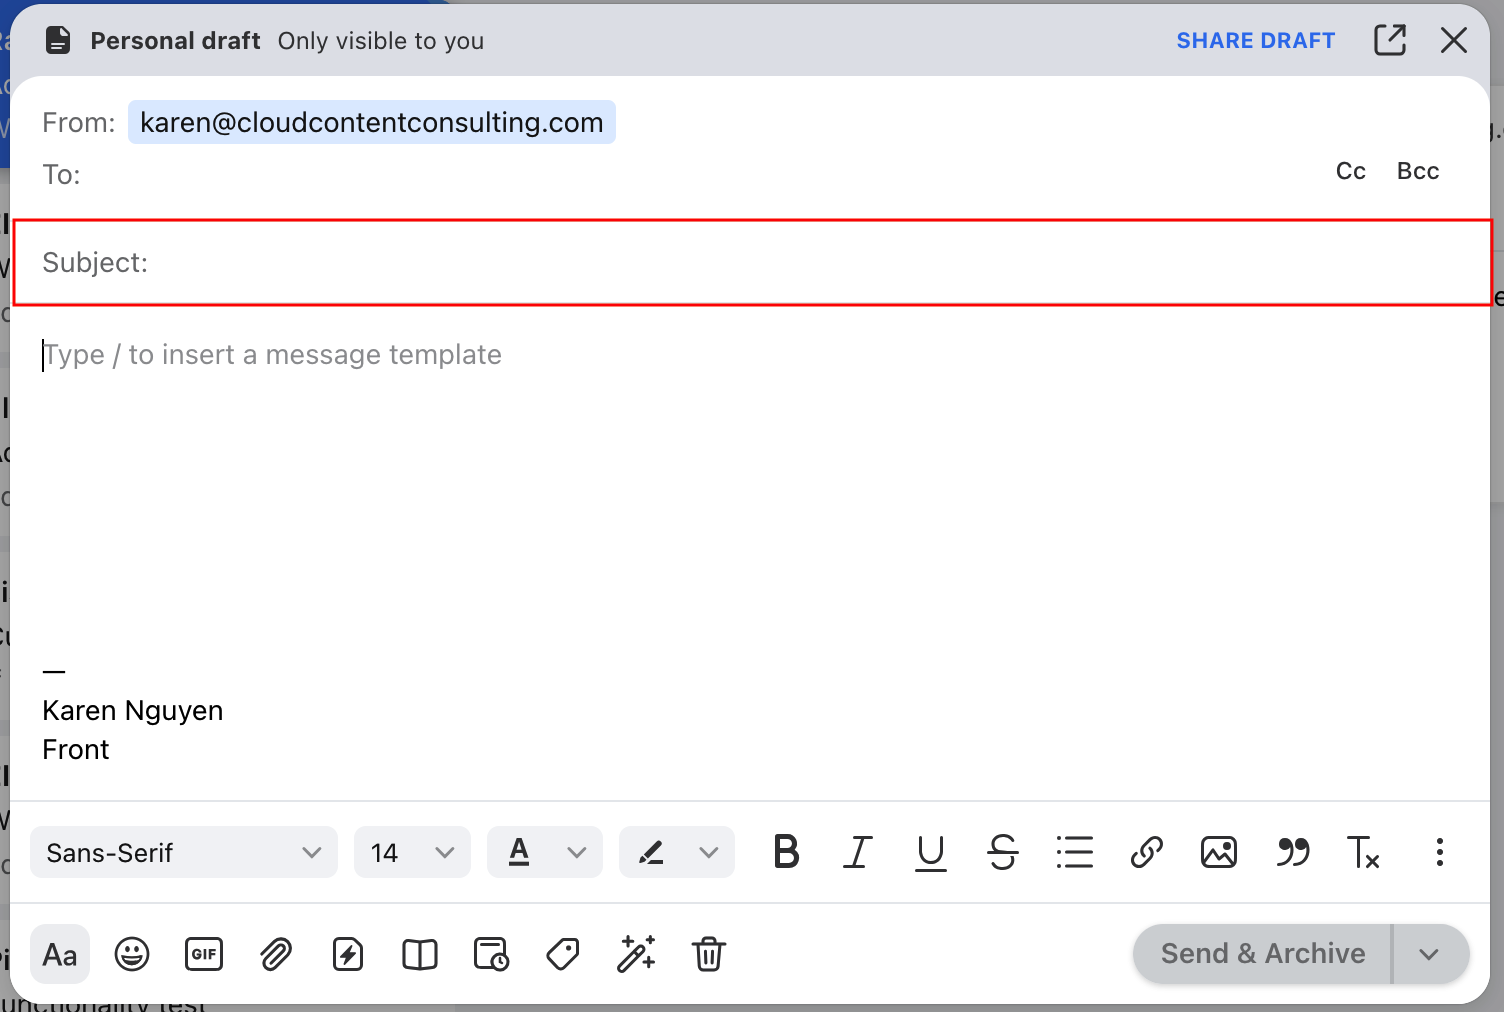 How to compose, send, and customize messages